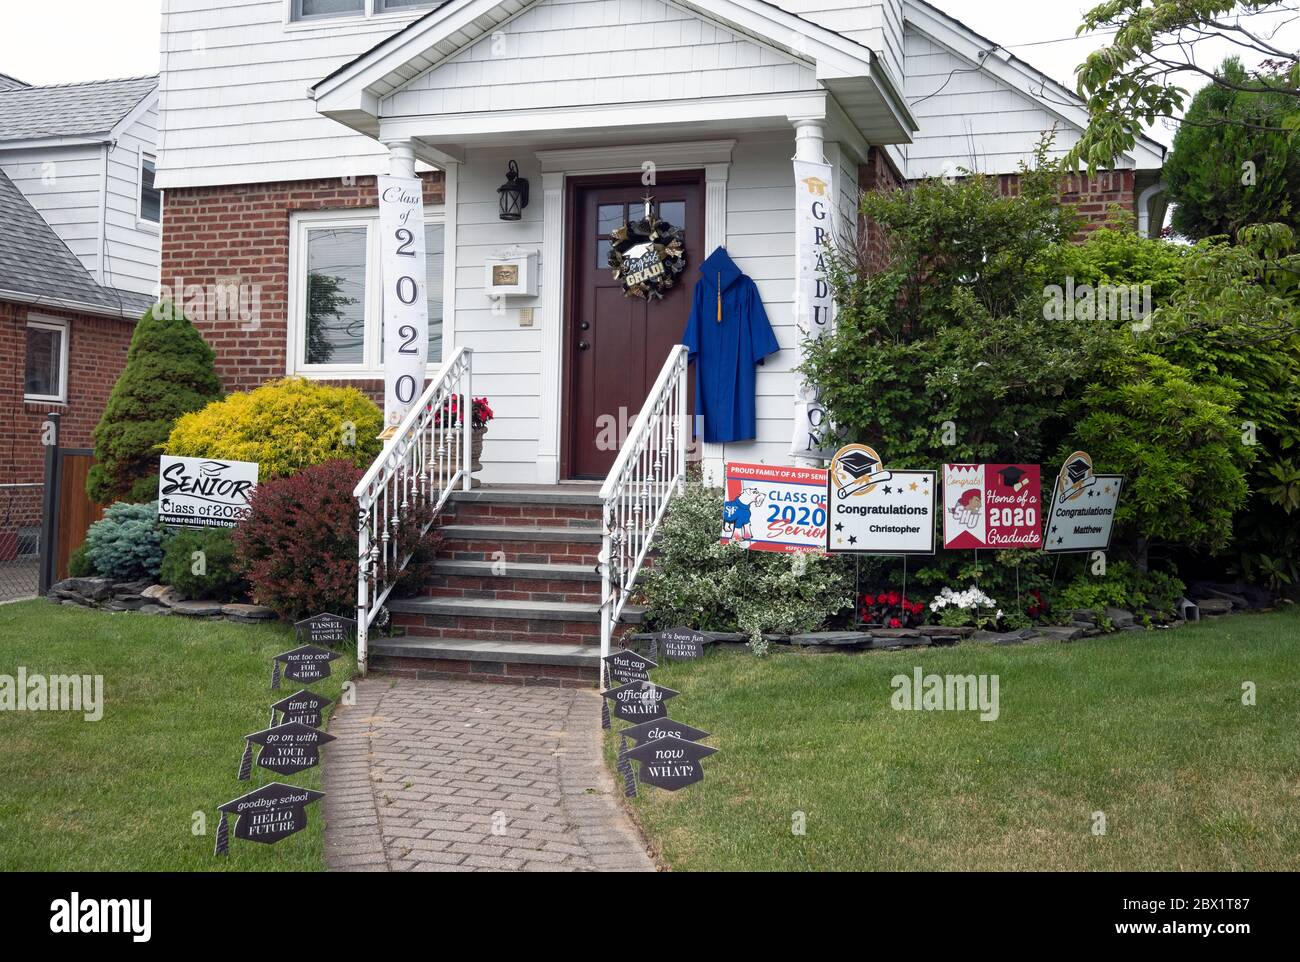 In lieu of an actual graduation, a family celebrates their graduates with congratulatory signs in their front yard. In Bayside, Queens, NYC. Stock Photo